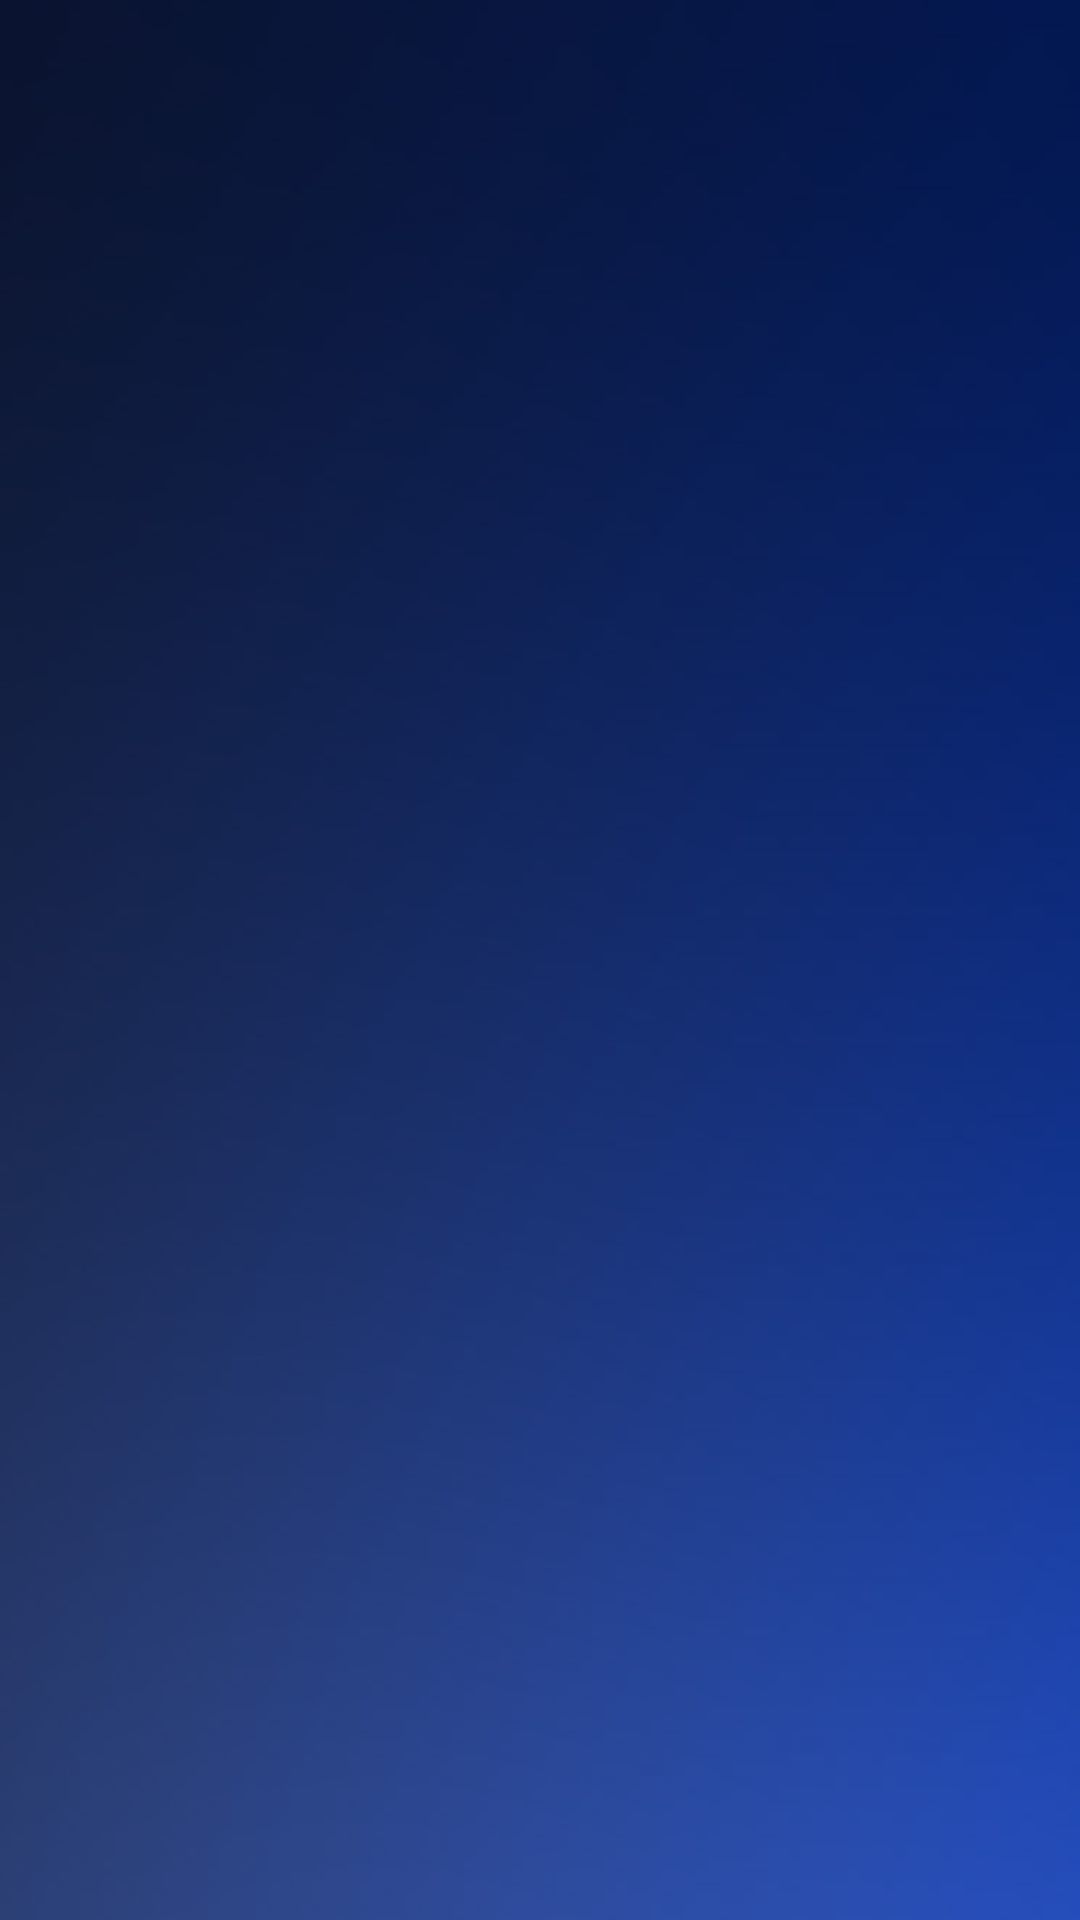 Midnight Blue Wallpaper background picture